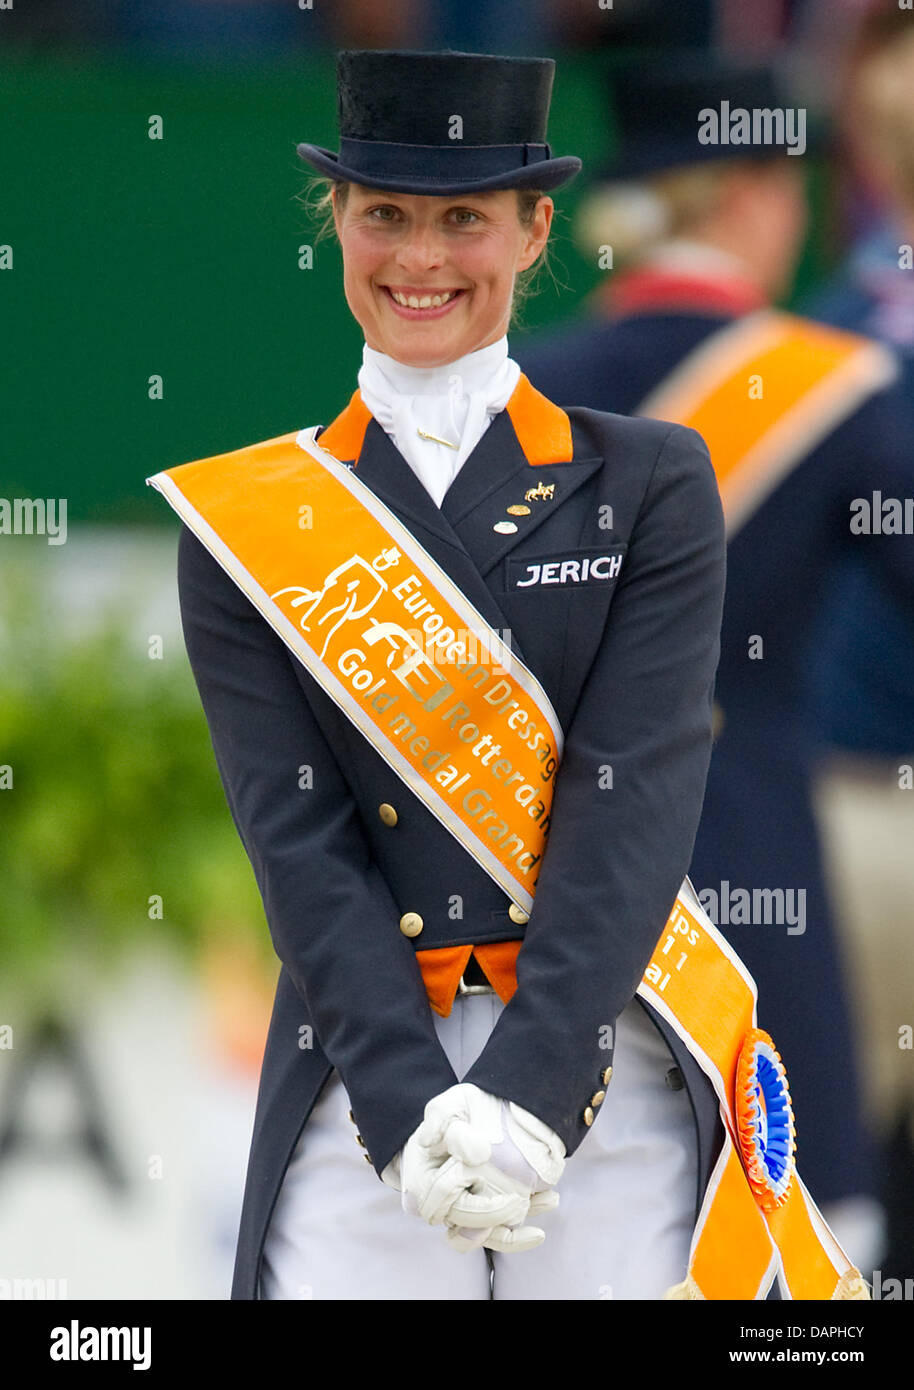 Dutch equestrian Adelinde Cornelissen smiles  during the award ceremony of the Grand Prix Special at the European Dressage Championship in Rotterdam, Netherlands, 20 August 2011. Cornelissen took first place. Photo: Uwe Anspach Stock Photo